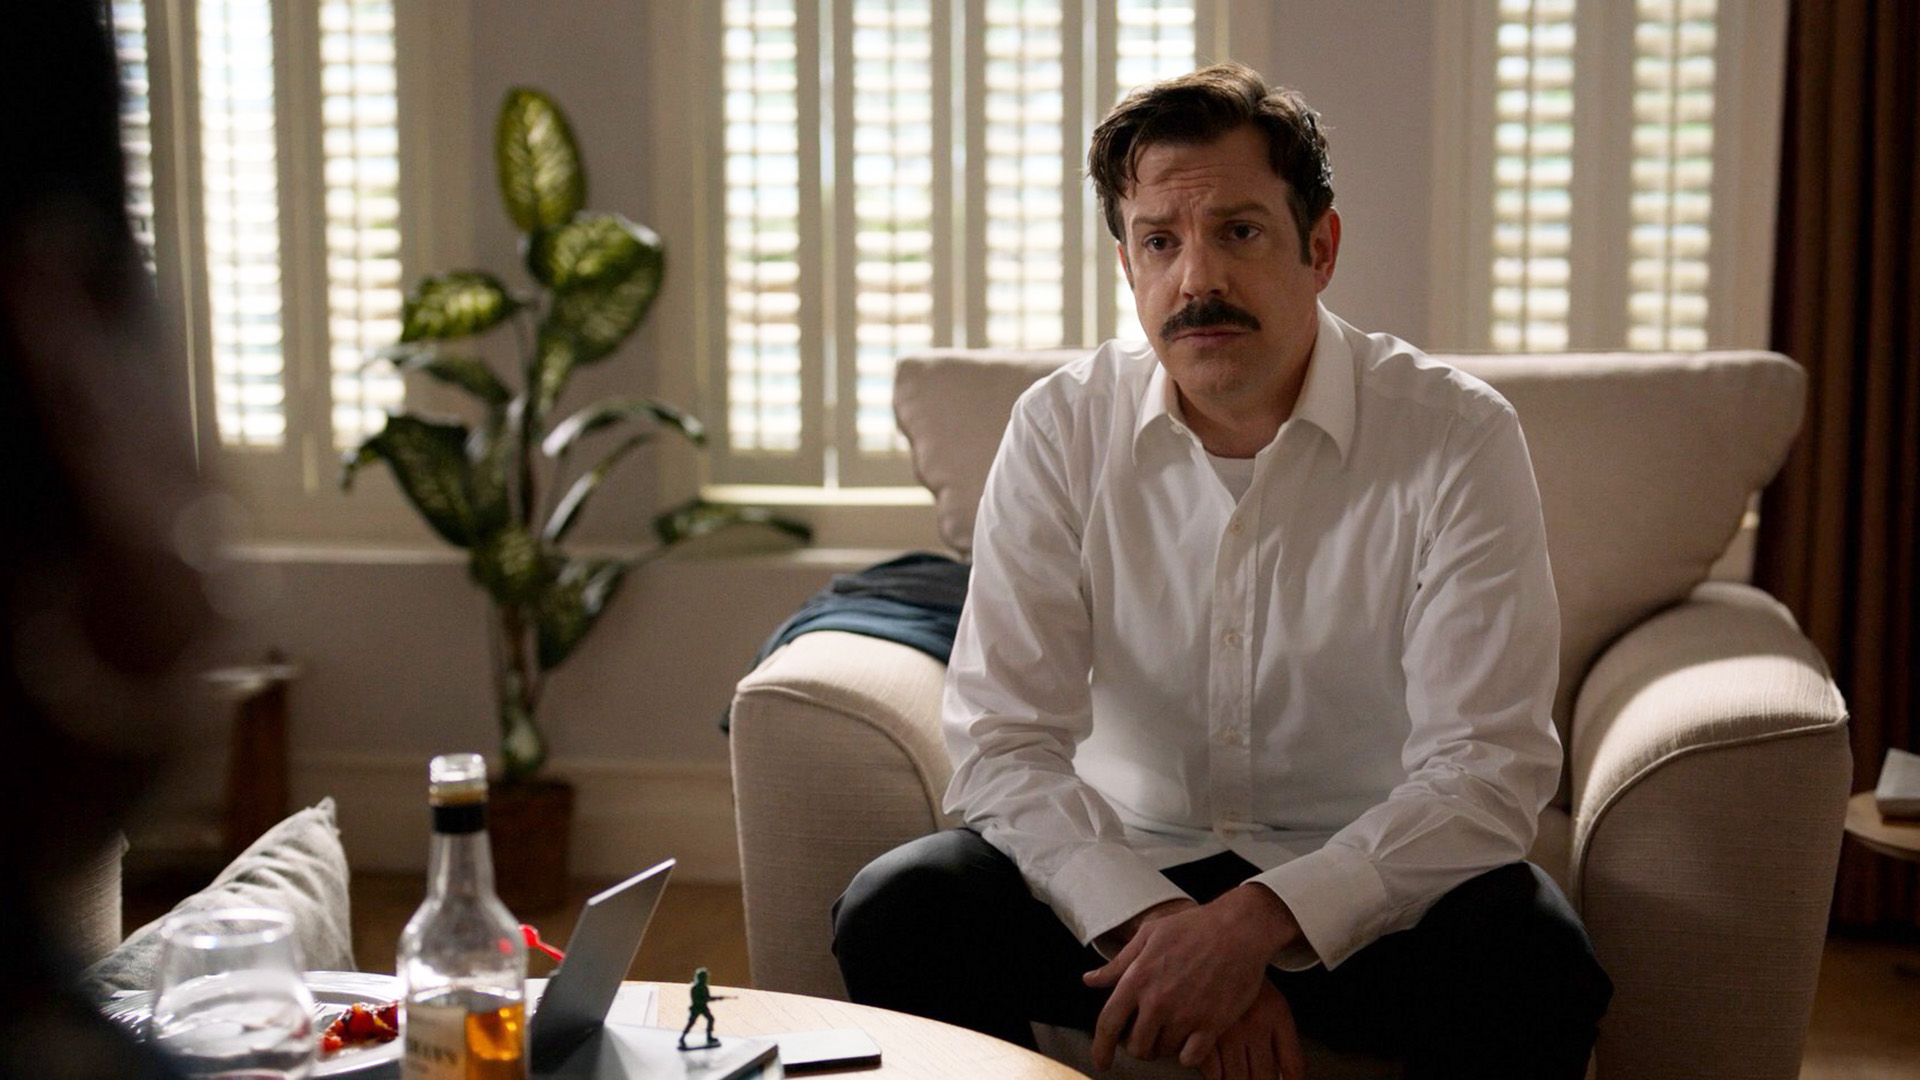 8 TV Shows That Will Give You That Ted Lasso-esque Warm & Fuzzy Feeling